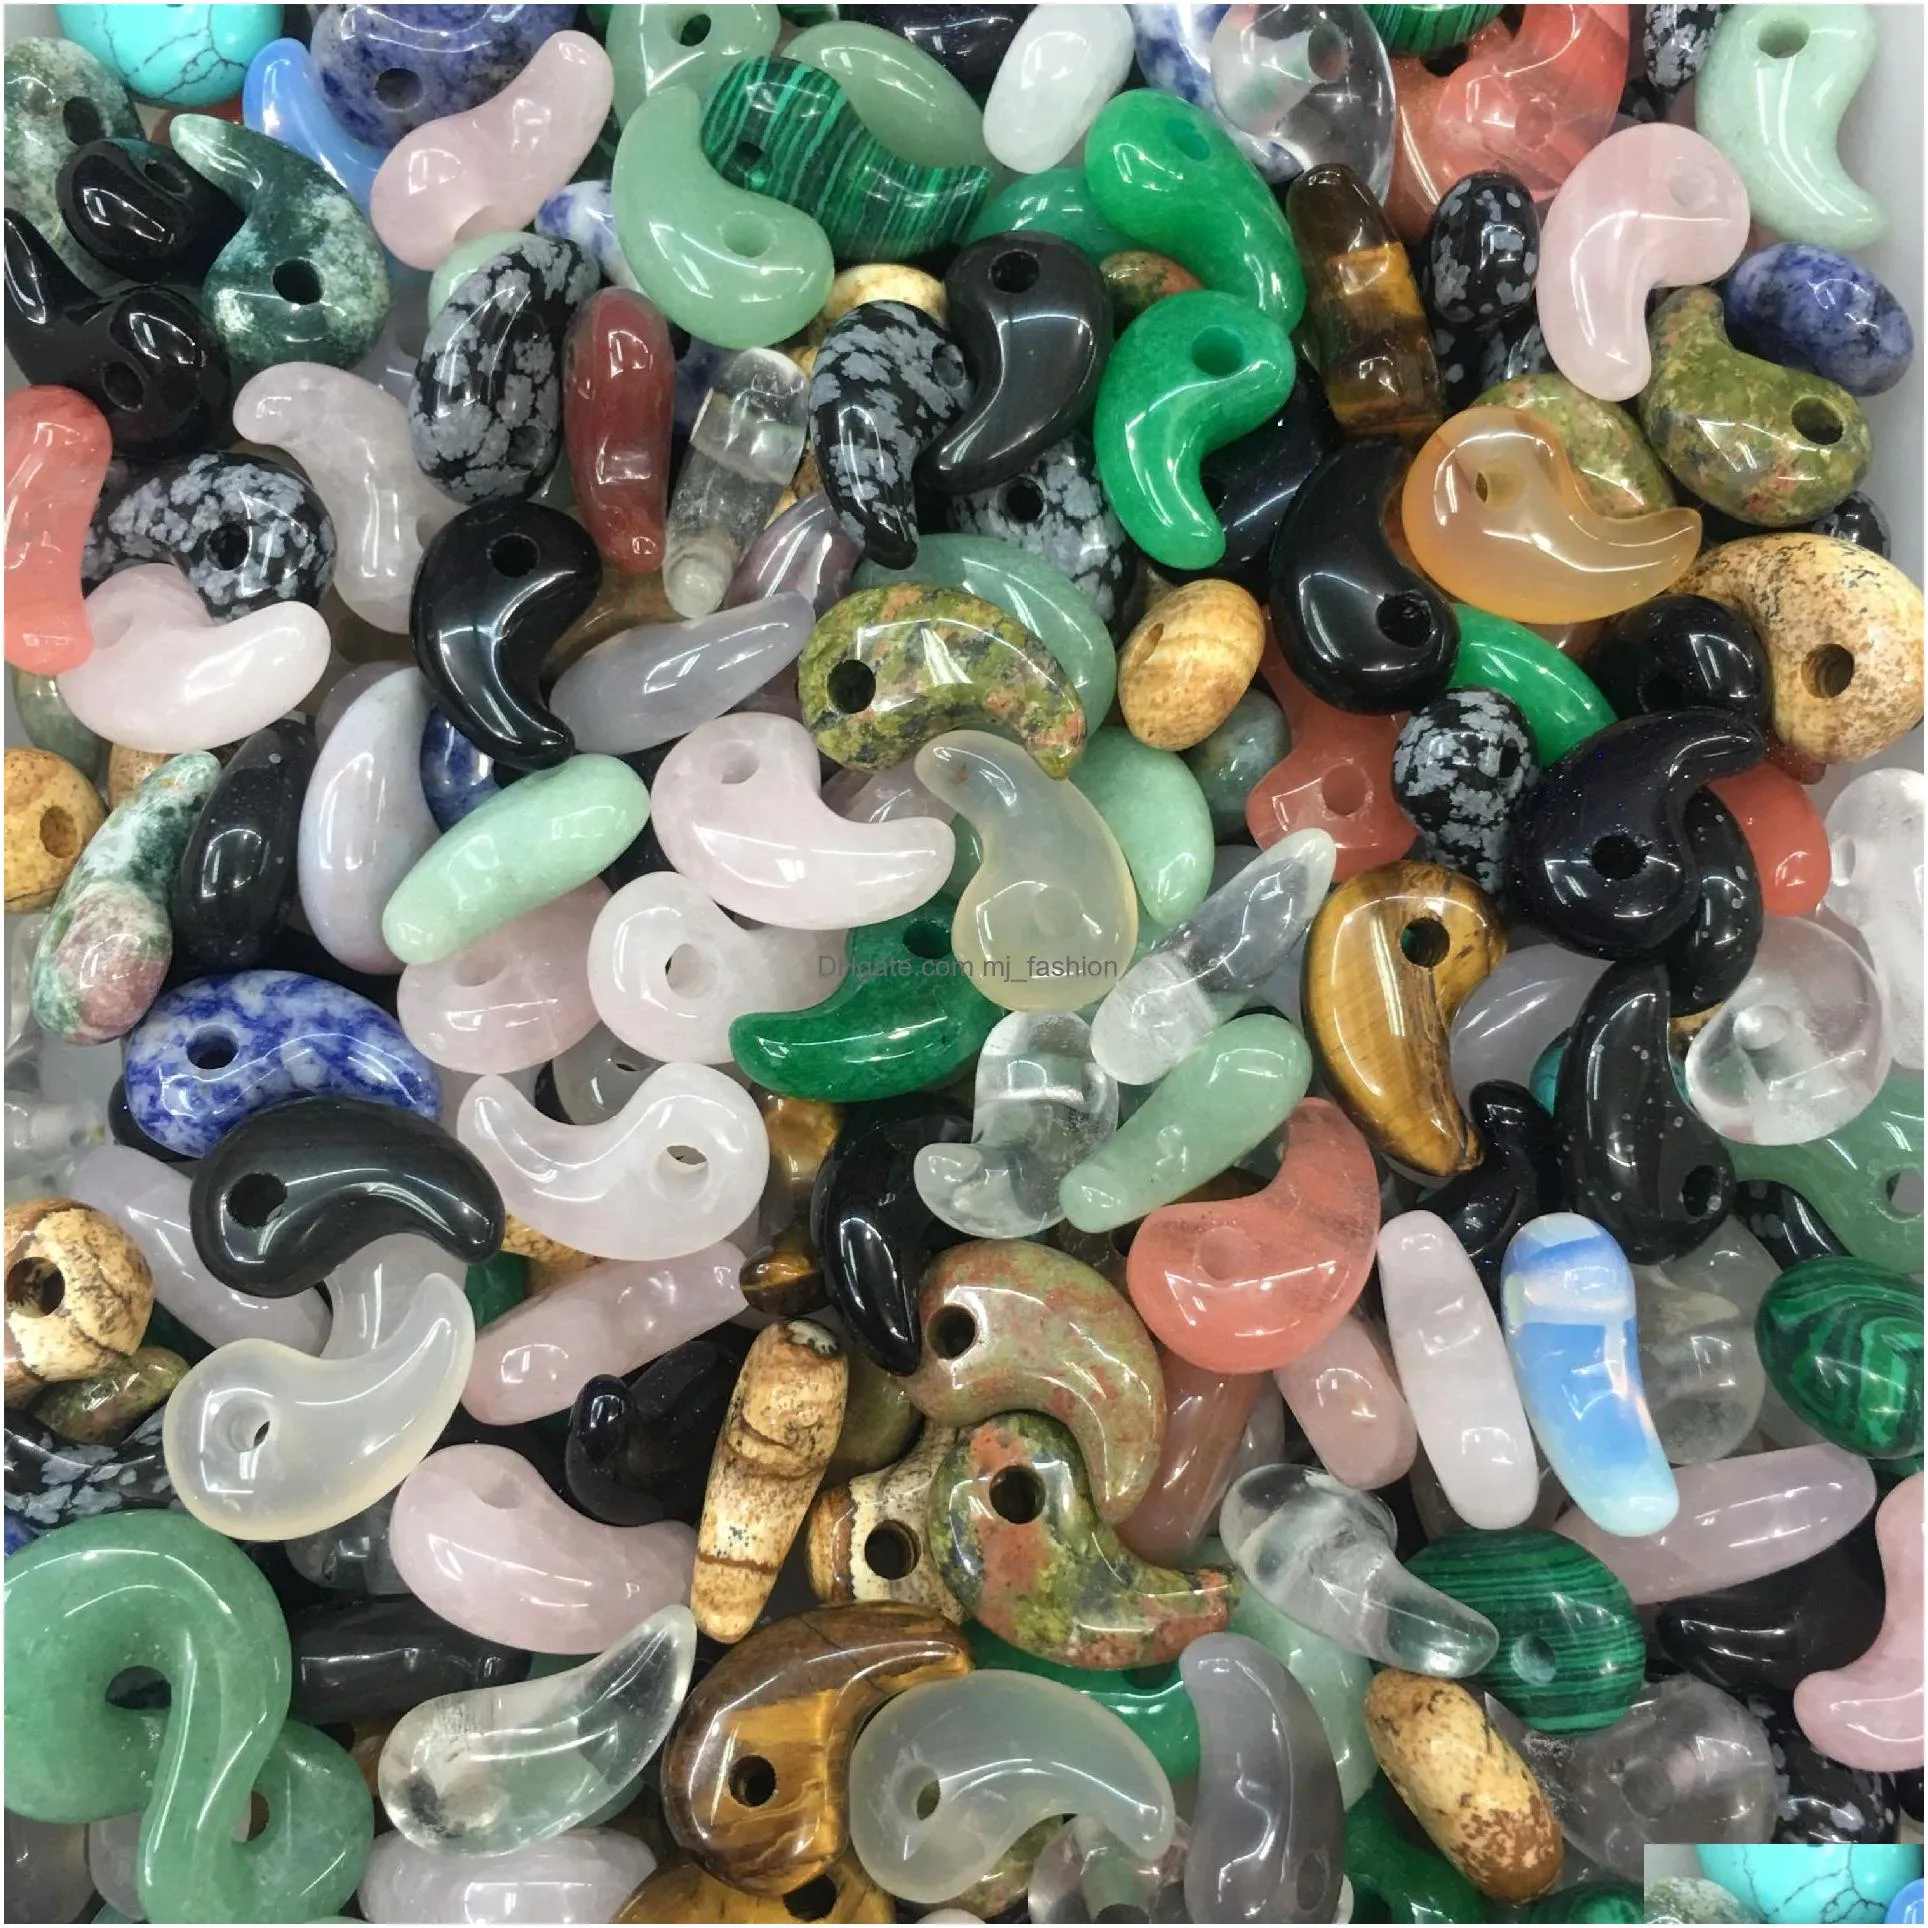 comma shape natural stone charms agates crystal turquoises jades opal stones pendant for jewelry making necklace bracelet 14x22mm